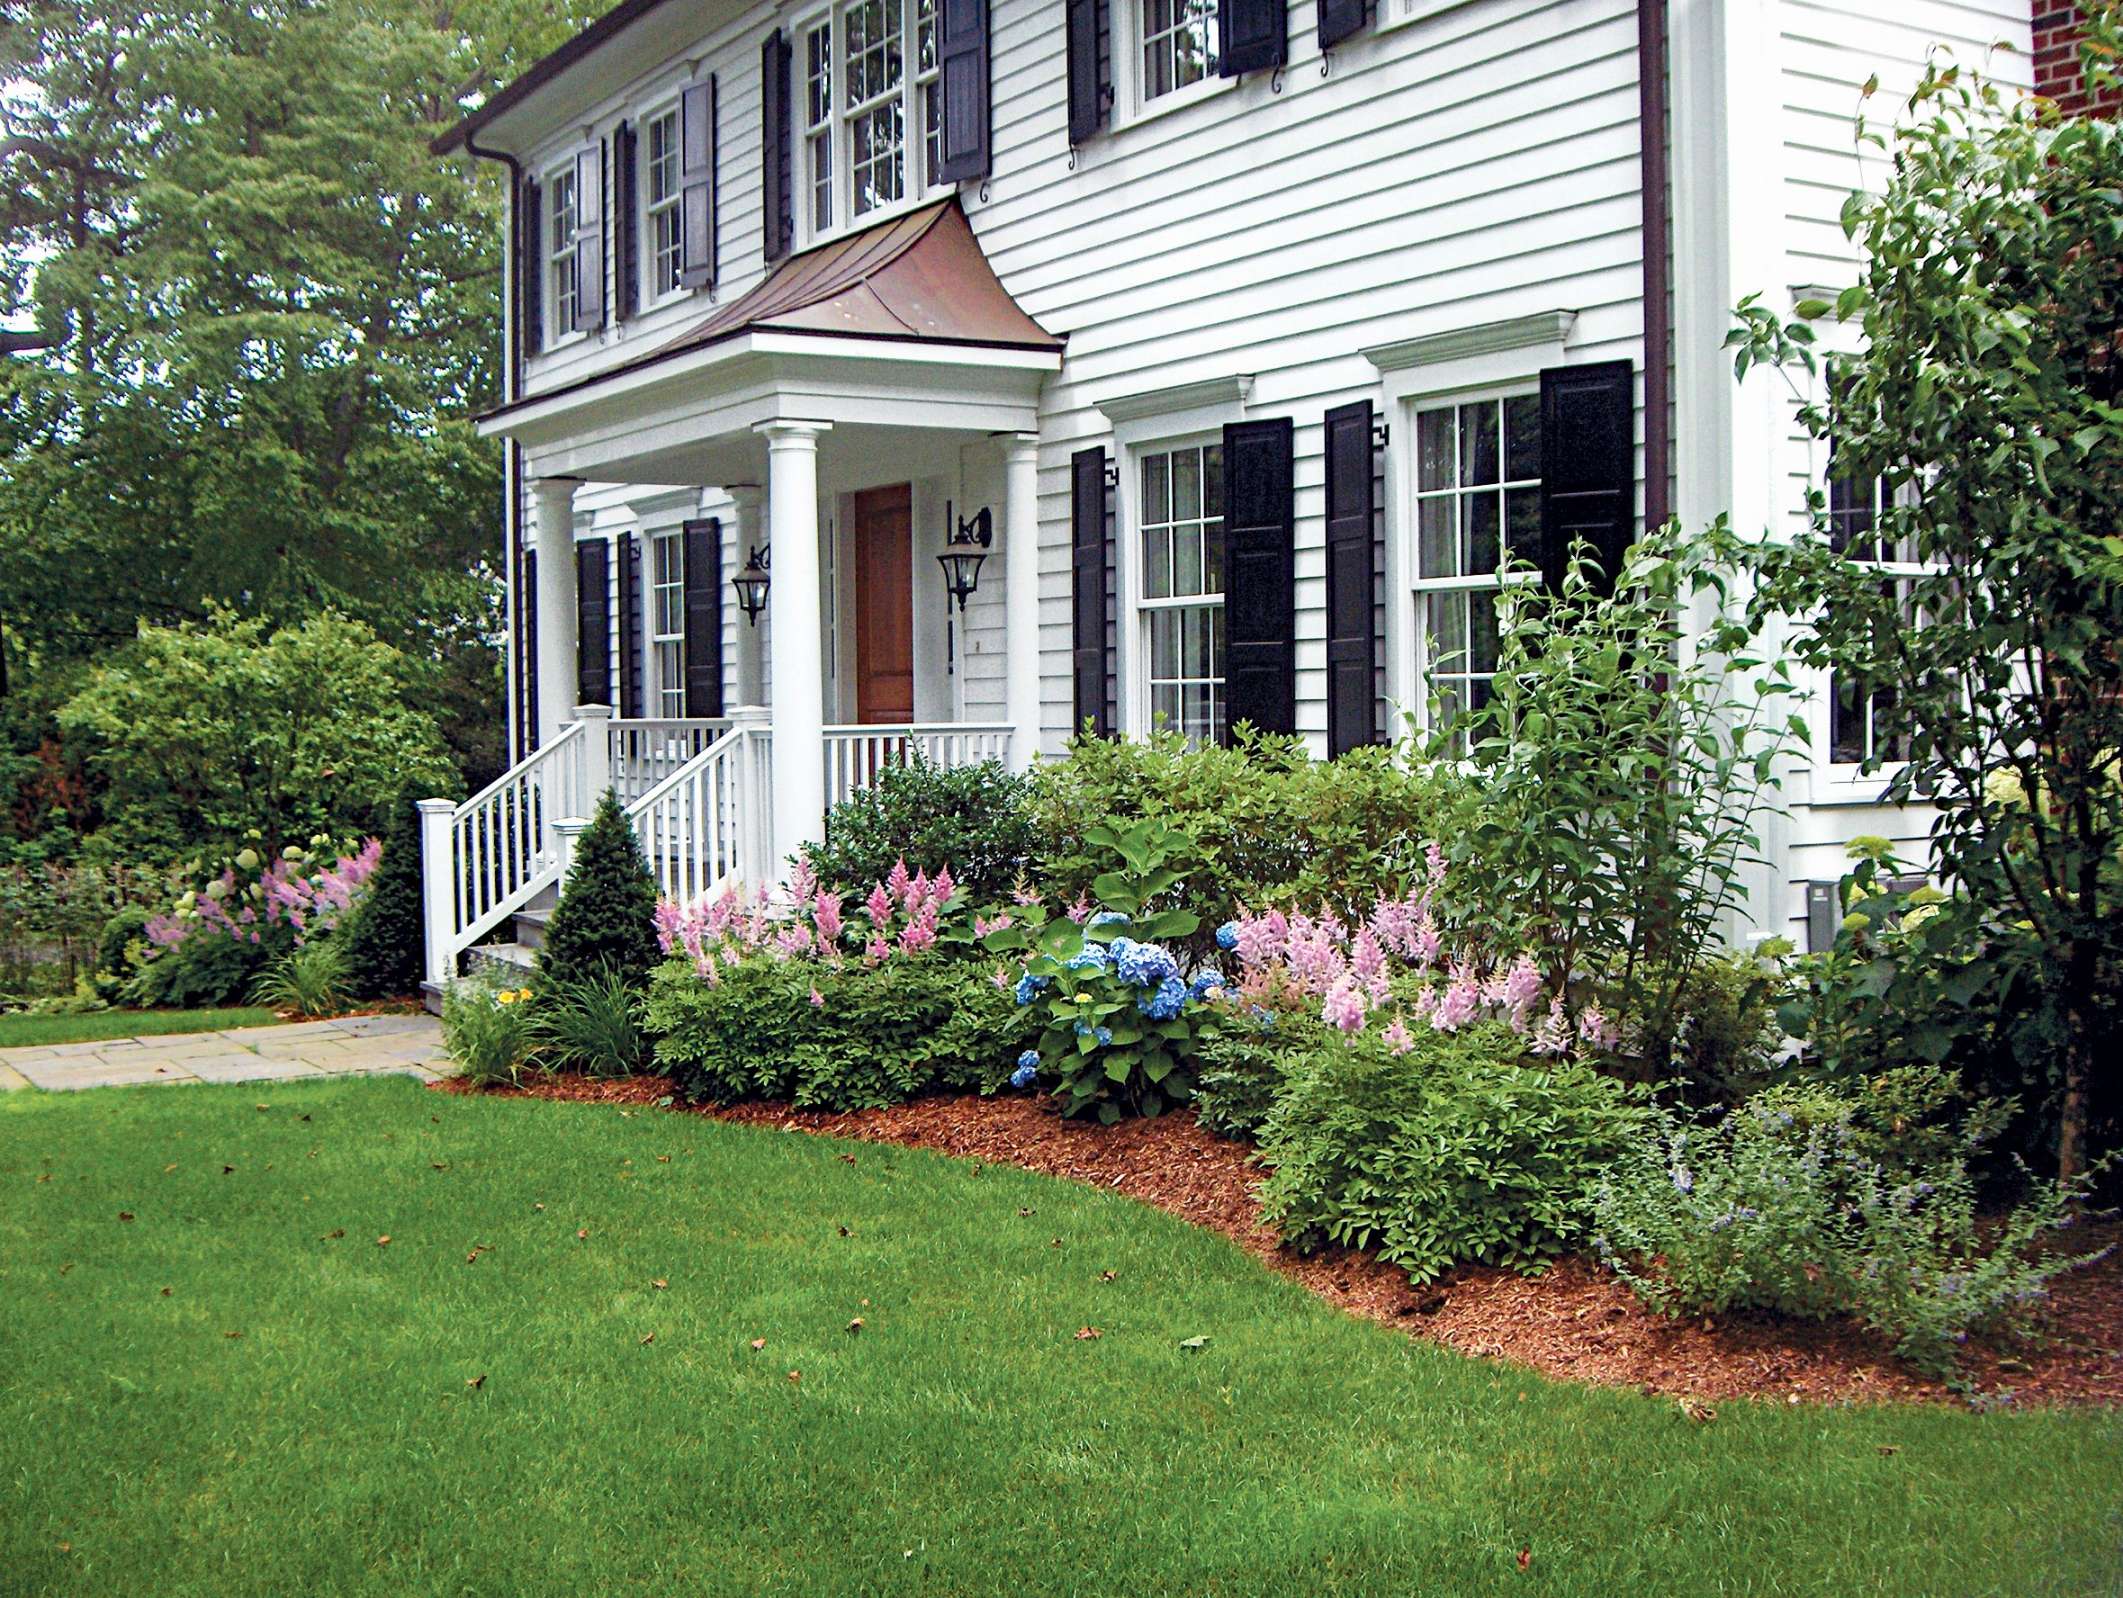 Foundation Plants: Design Ideas For Beautiful Landscaping - This